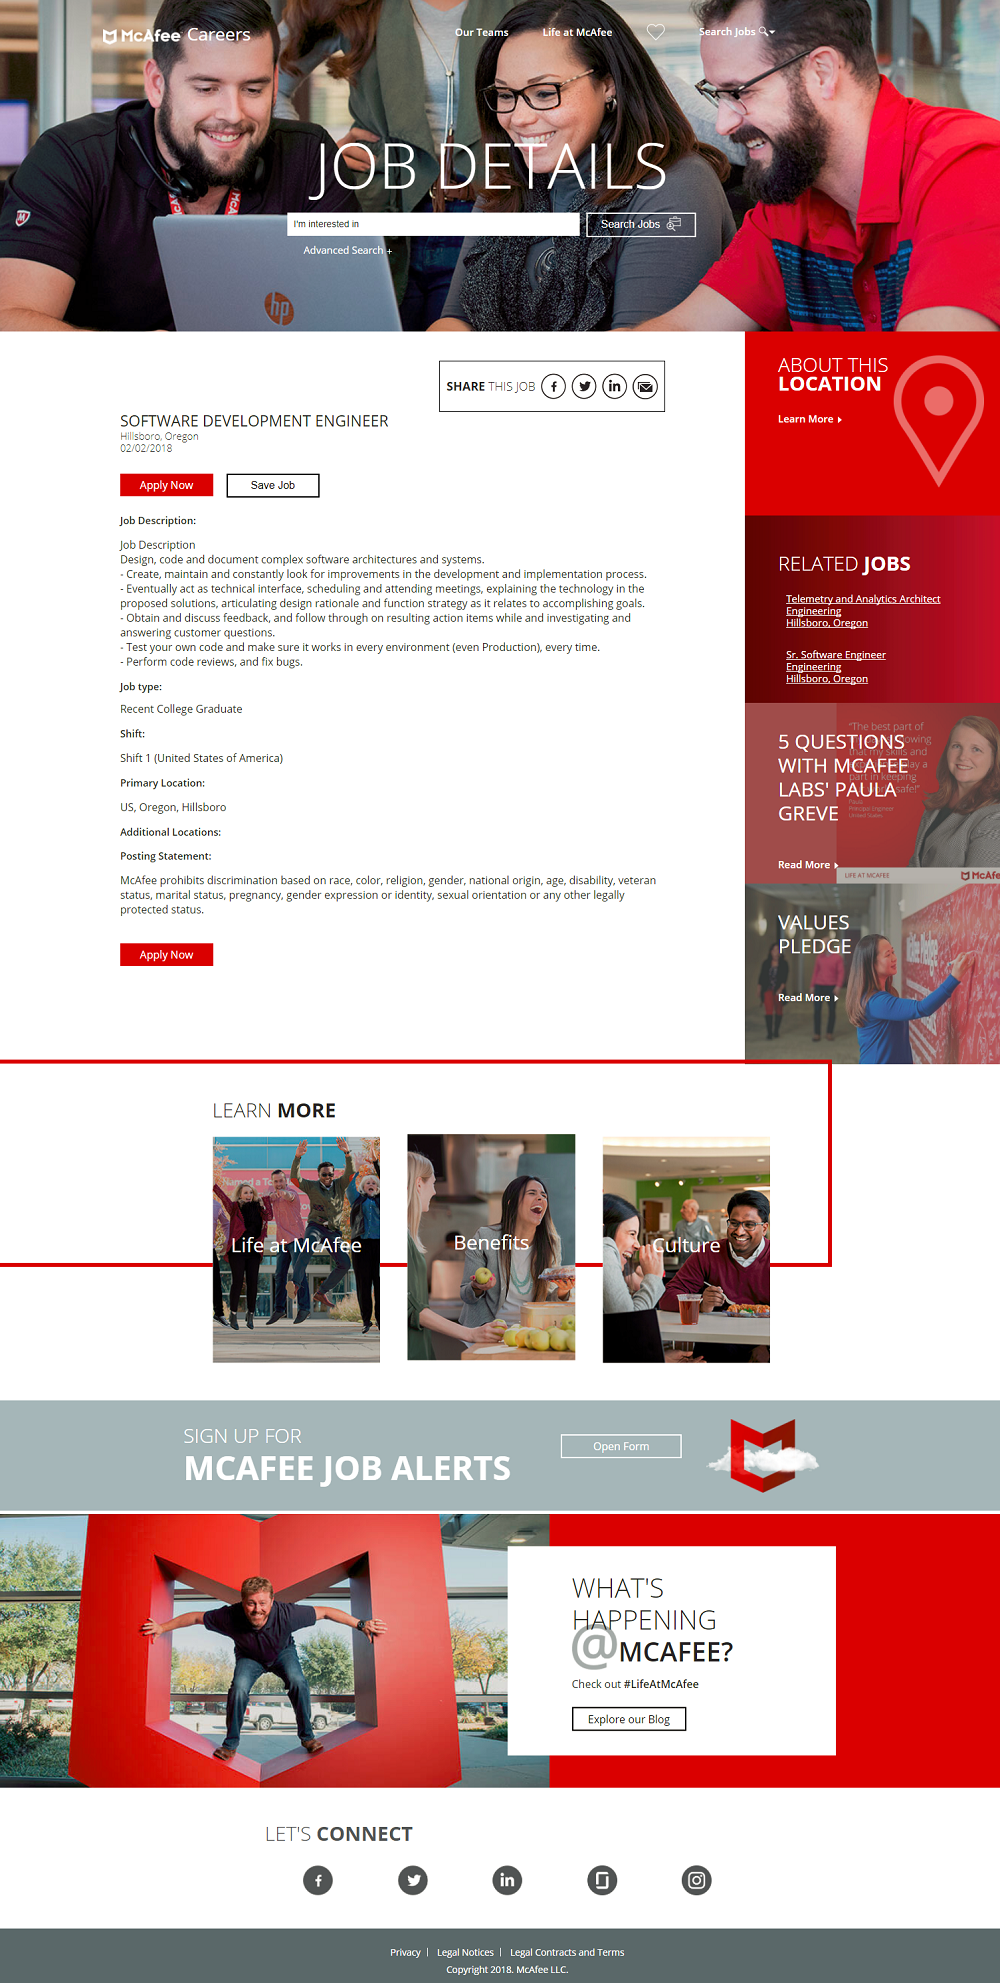 10 Examples of the Best Job Ads 2018 - McAfee